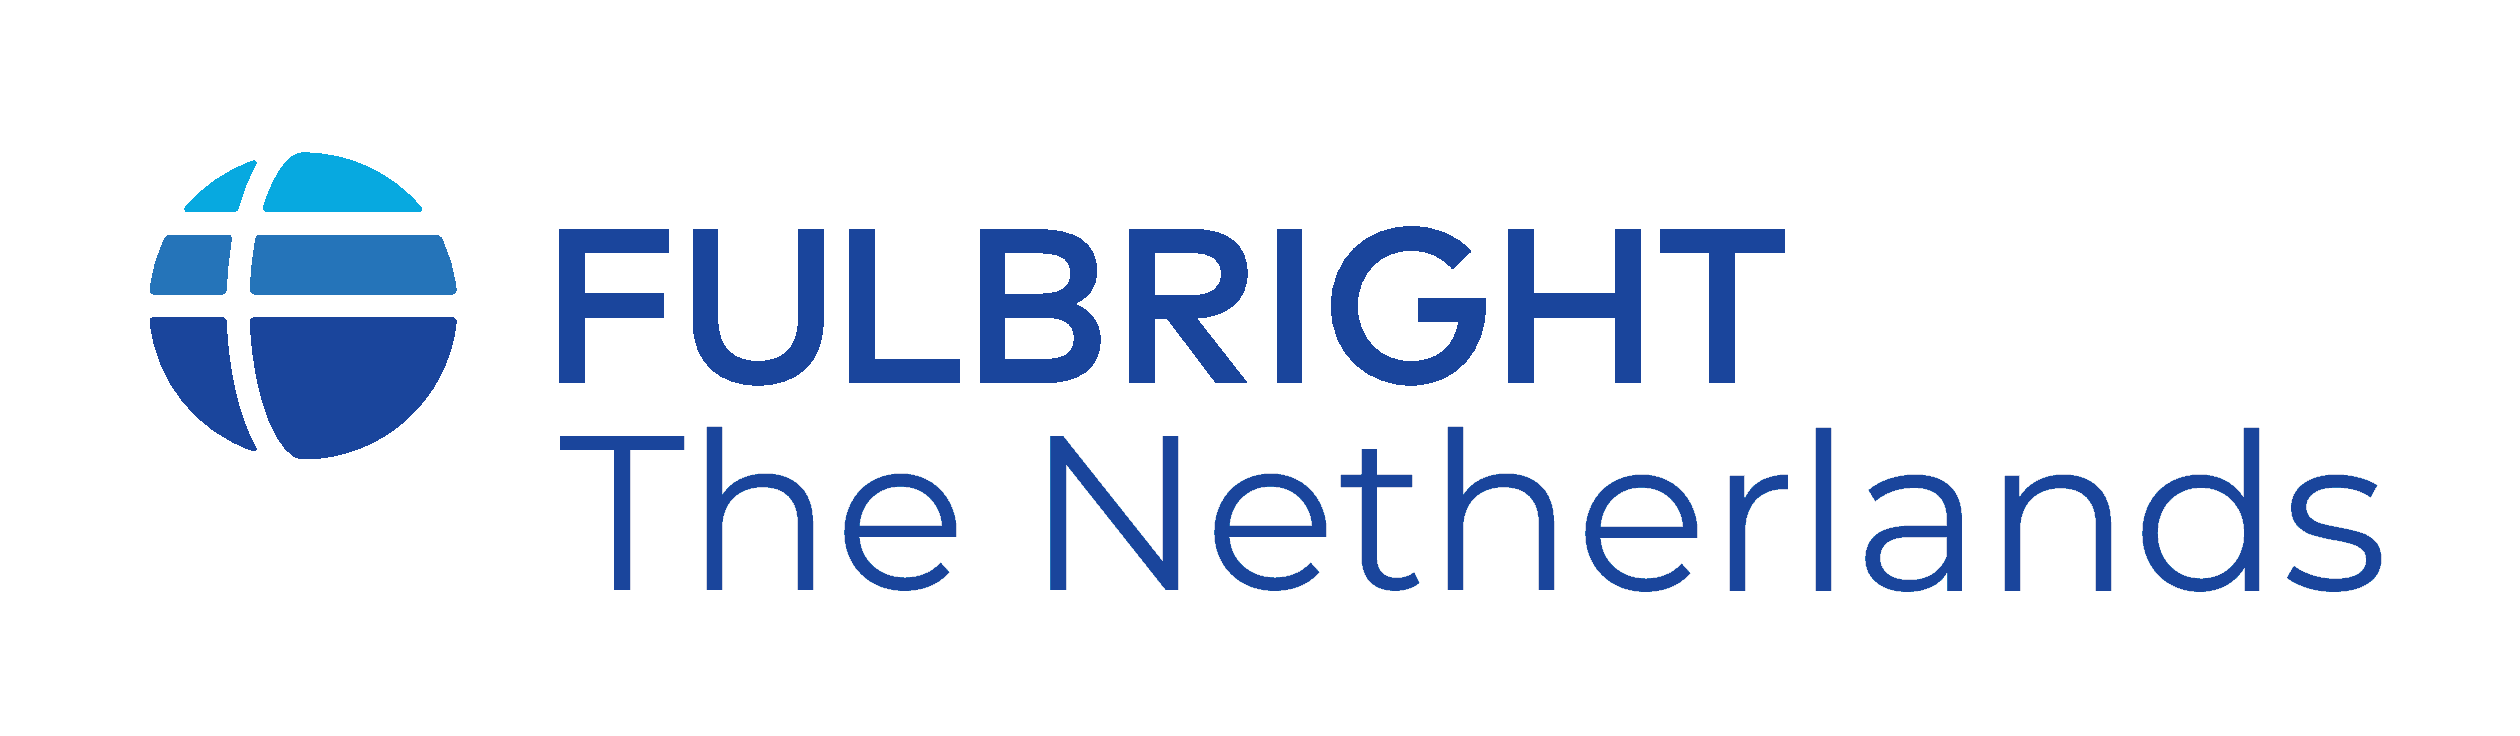 FULBRIGHT COMMISSION THE NETHERLANDS